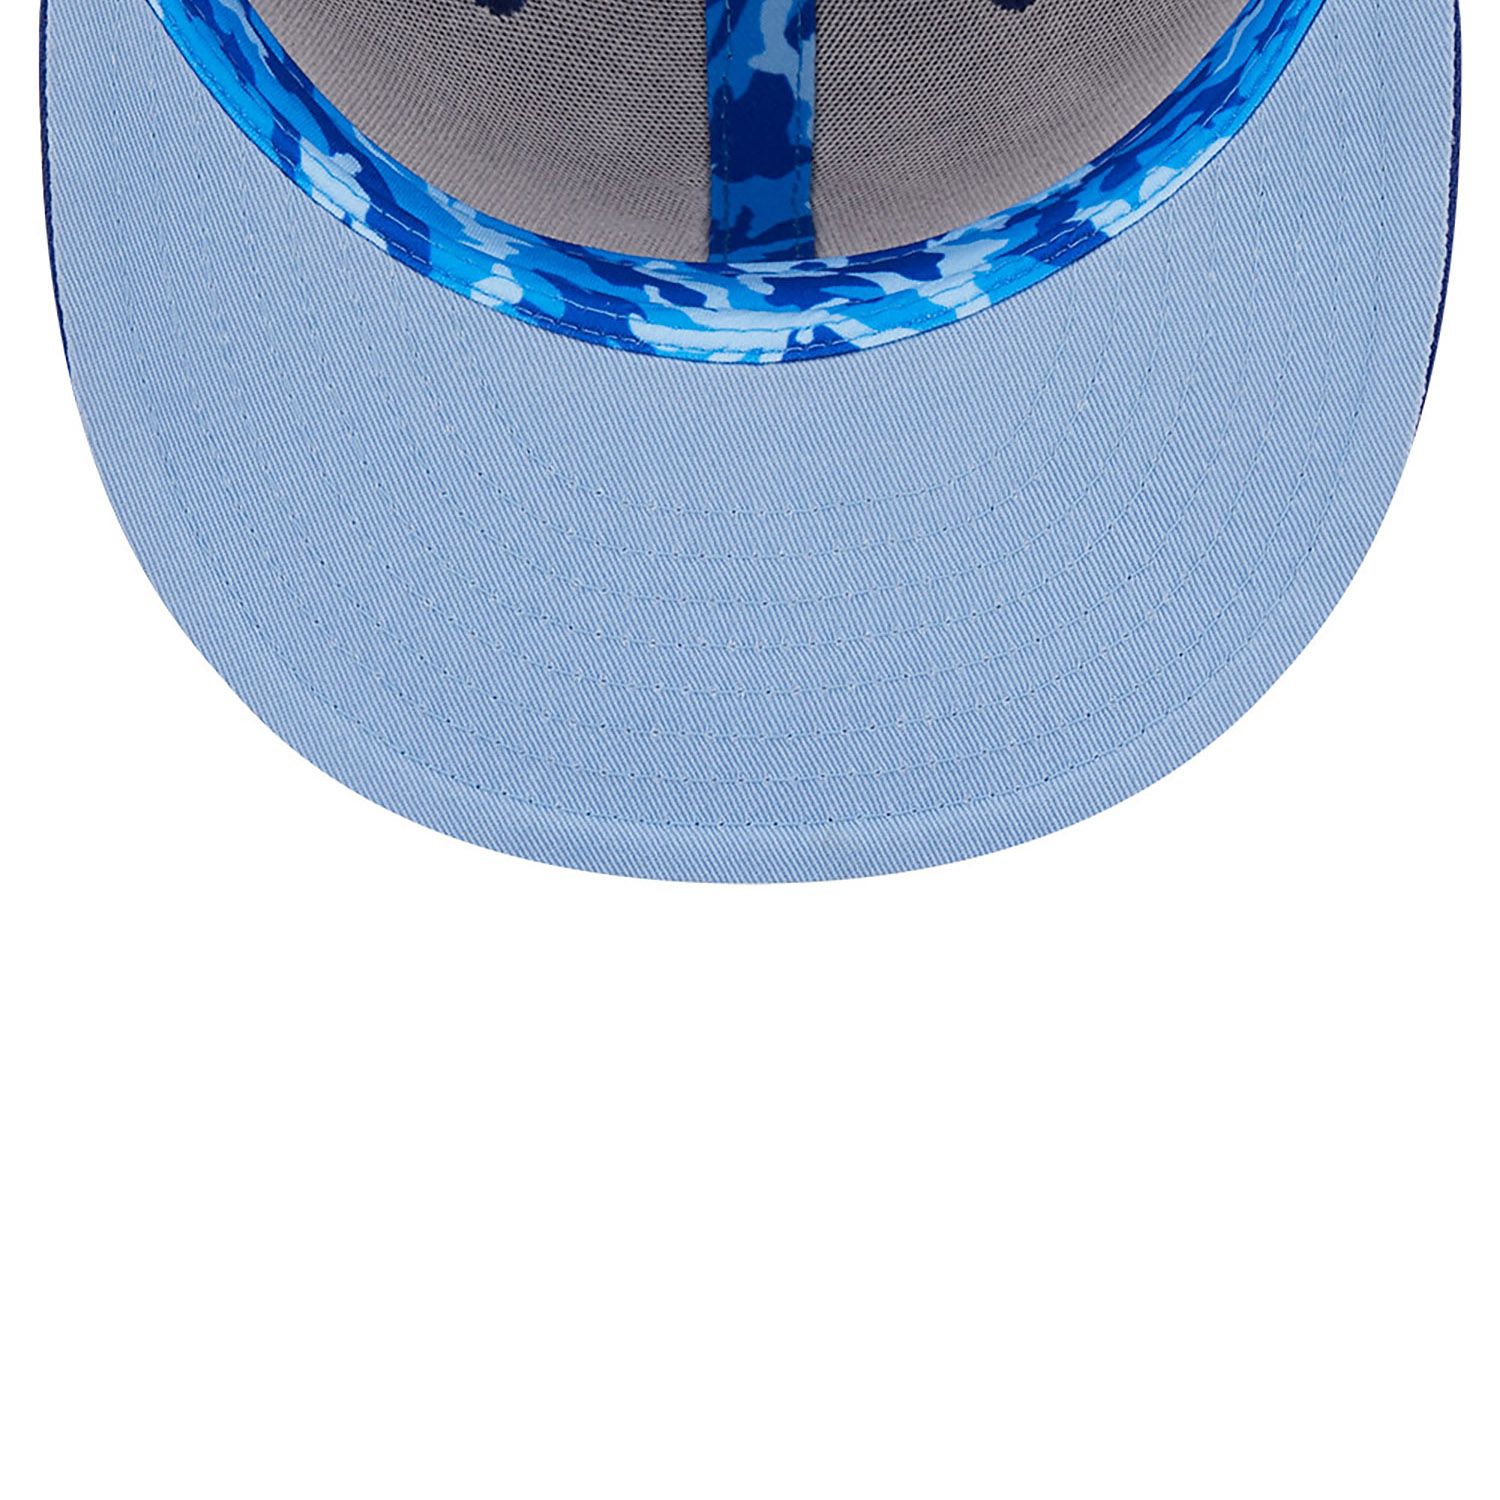 New York Mets Monocamo Blue 59FIFTY Fitted Cap